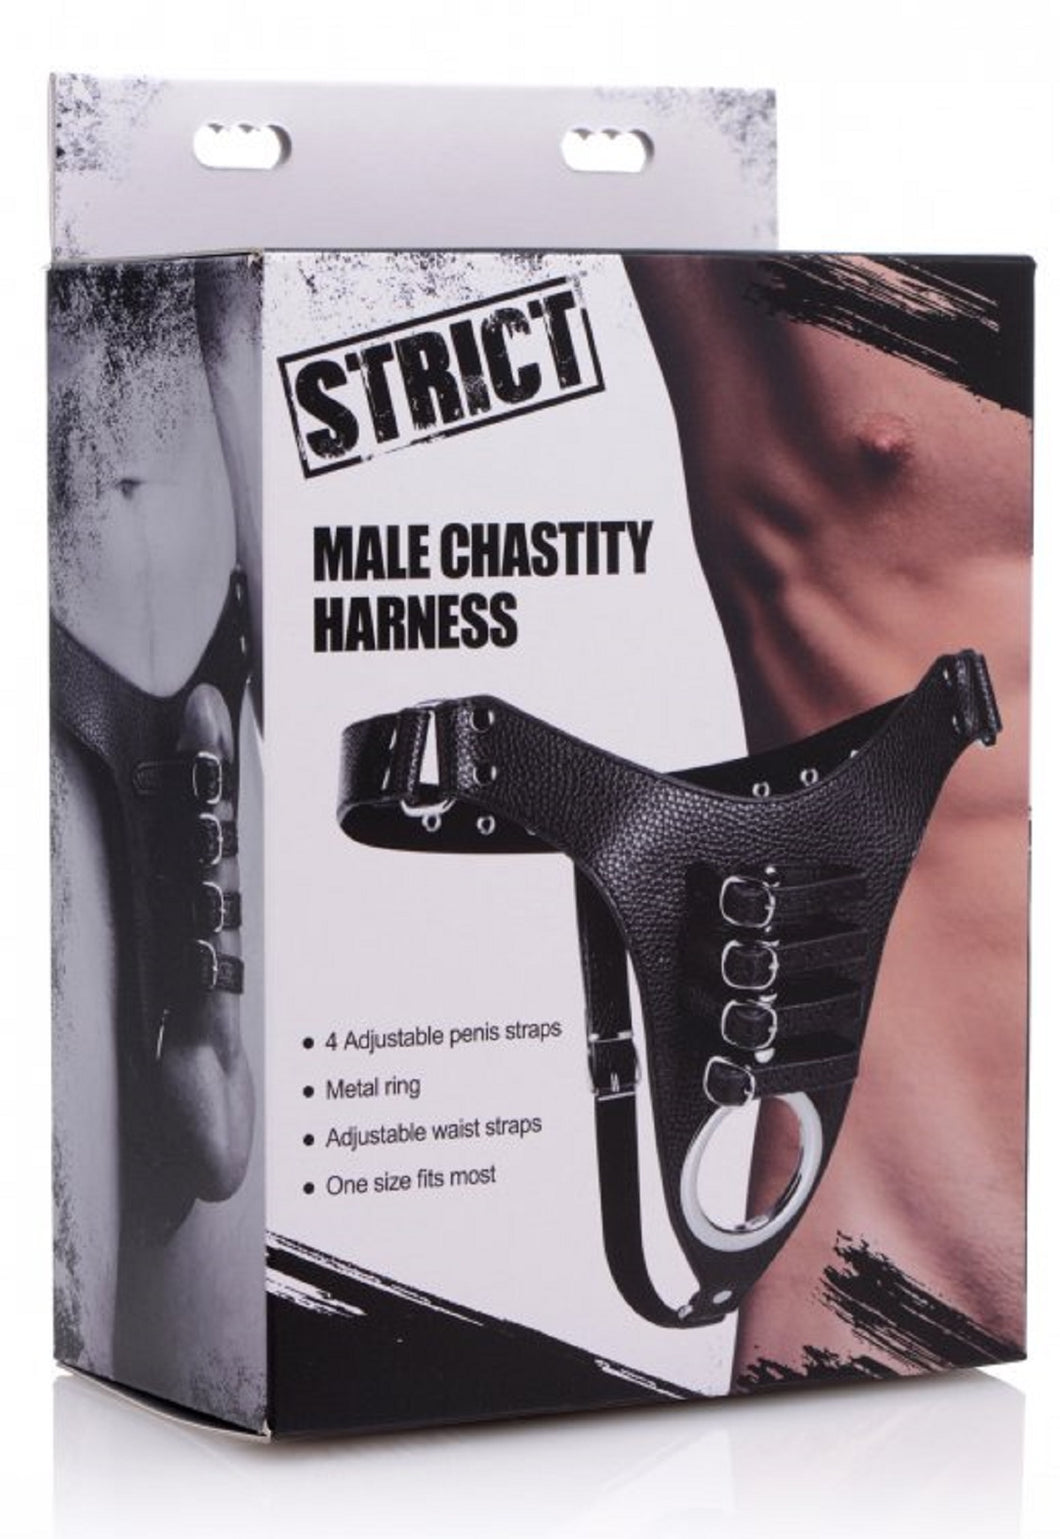 Strict Black Male Chastity Harness. - Beautiful Stranger 2020